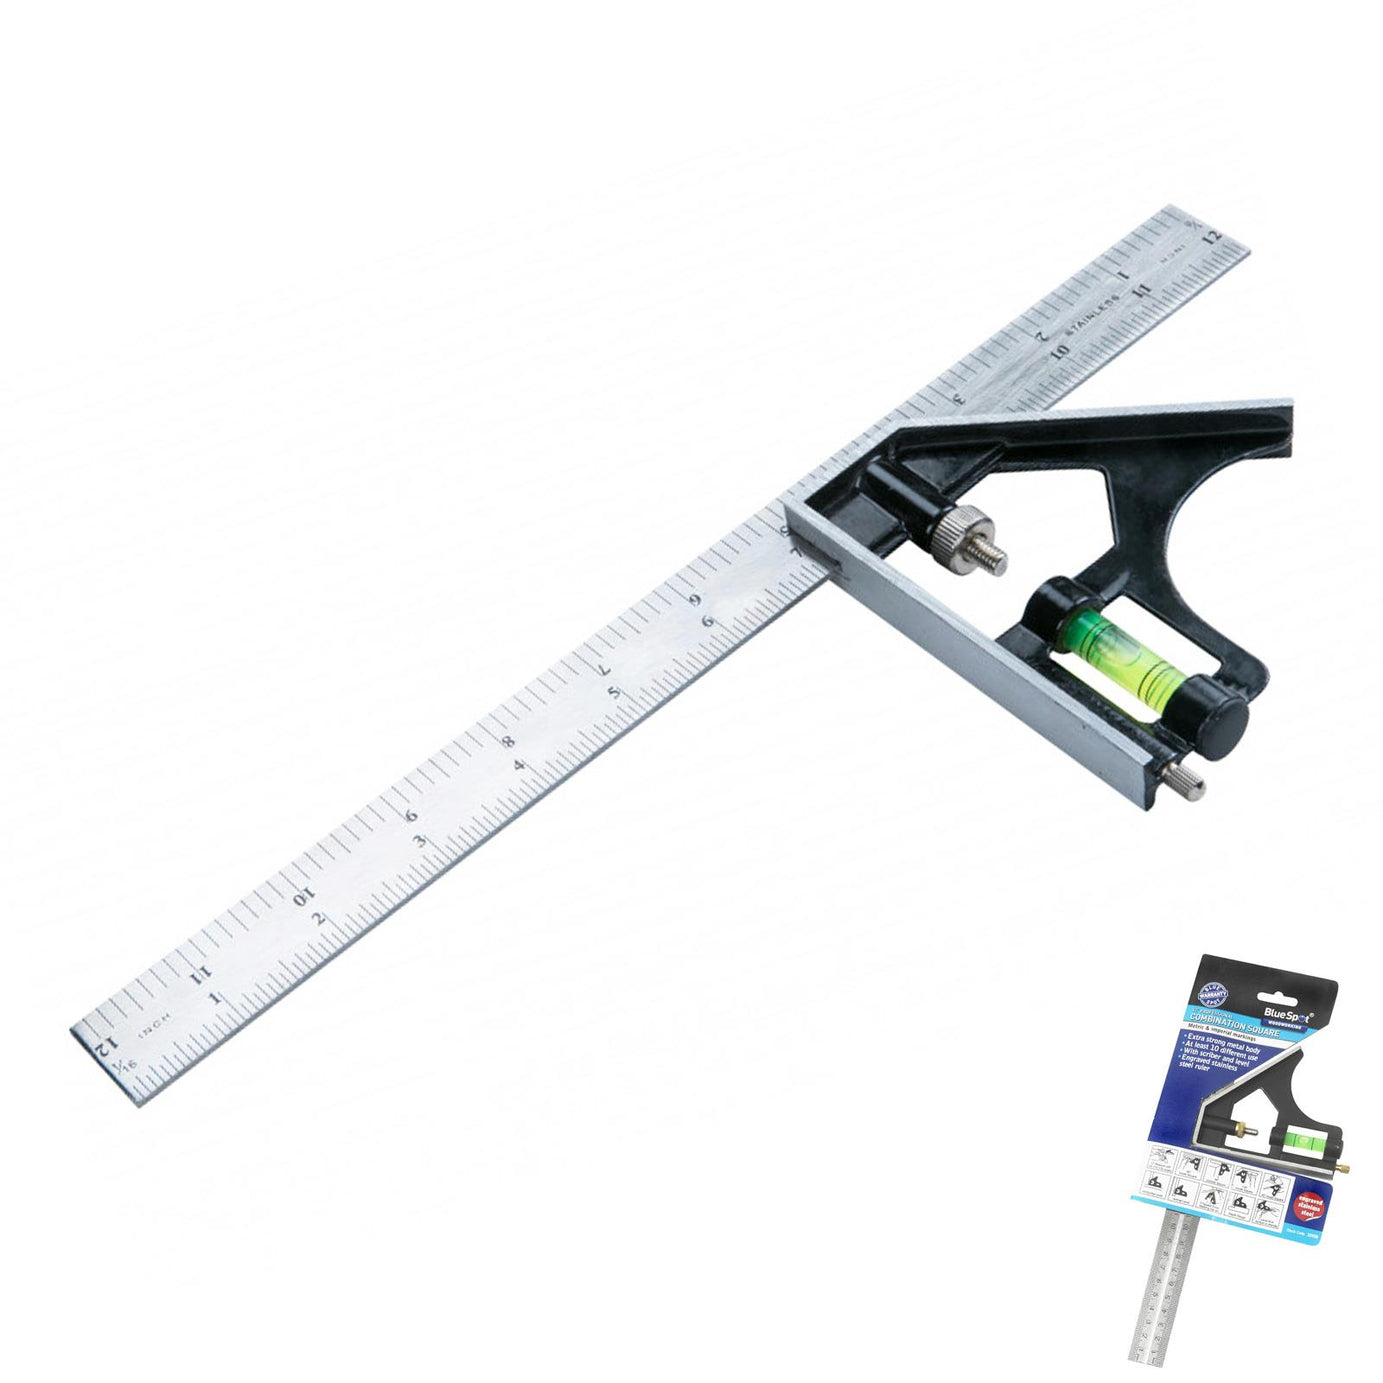 BlueSpot 300mm 12" Combination Square Heavy Duty Try Set Right Angle Ruler